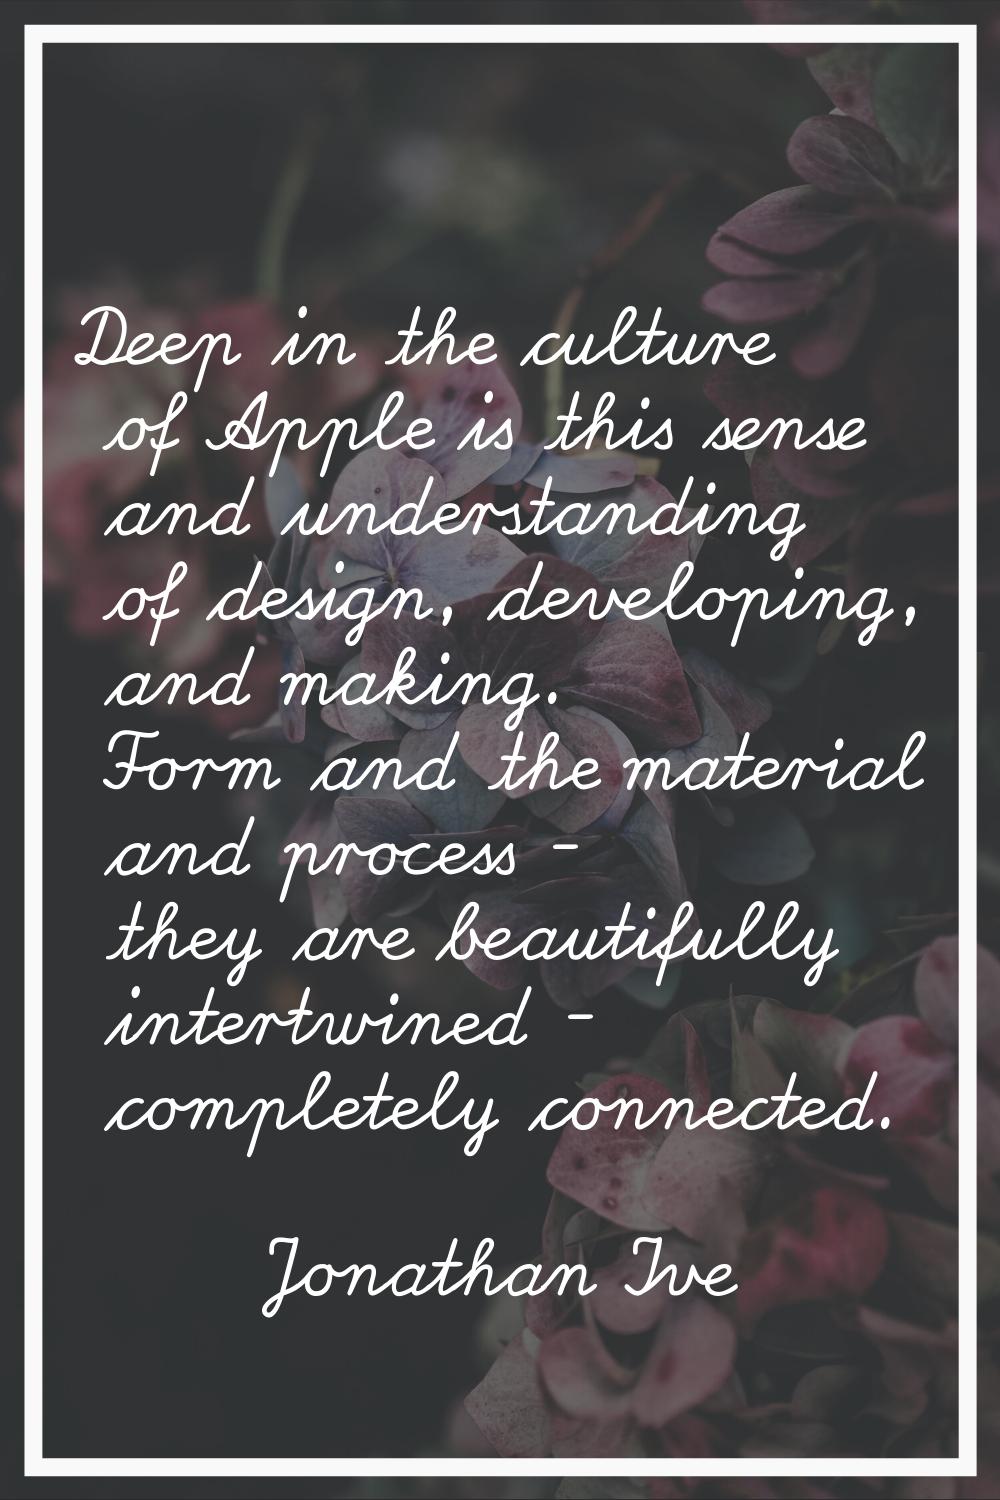 Deep in the culture of Apple is this sense and understanding of design, developing, and making. For